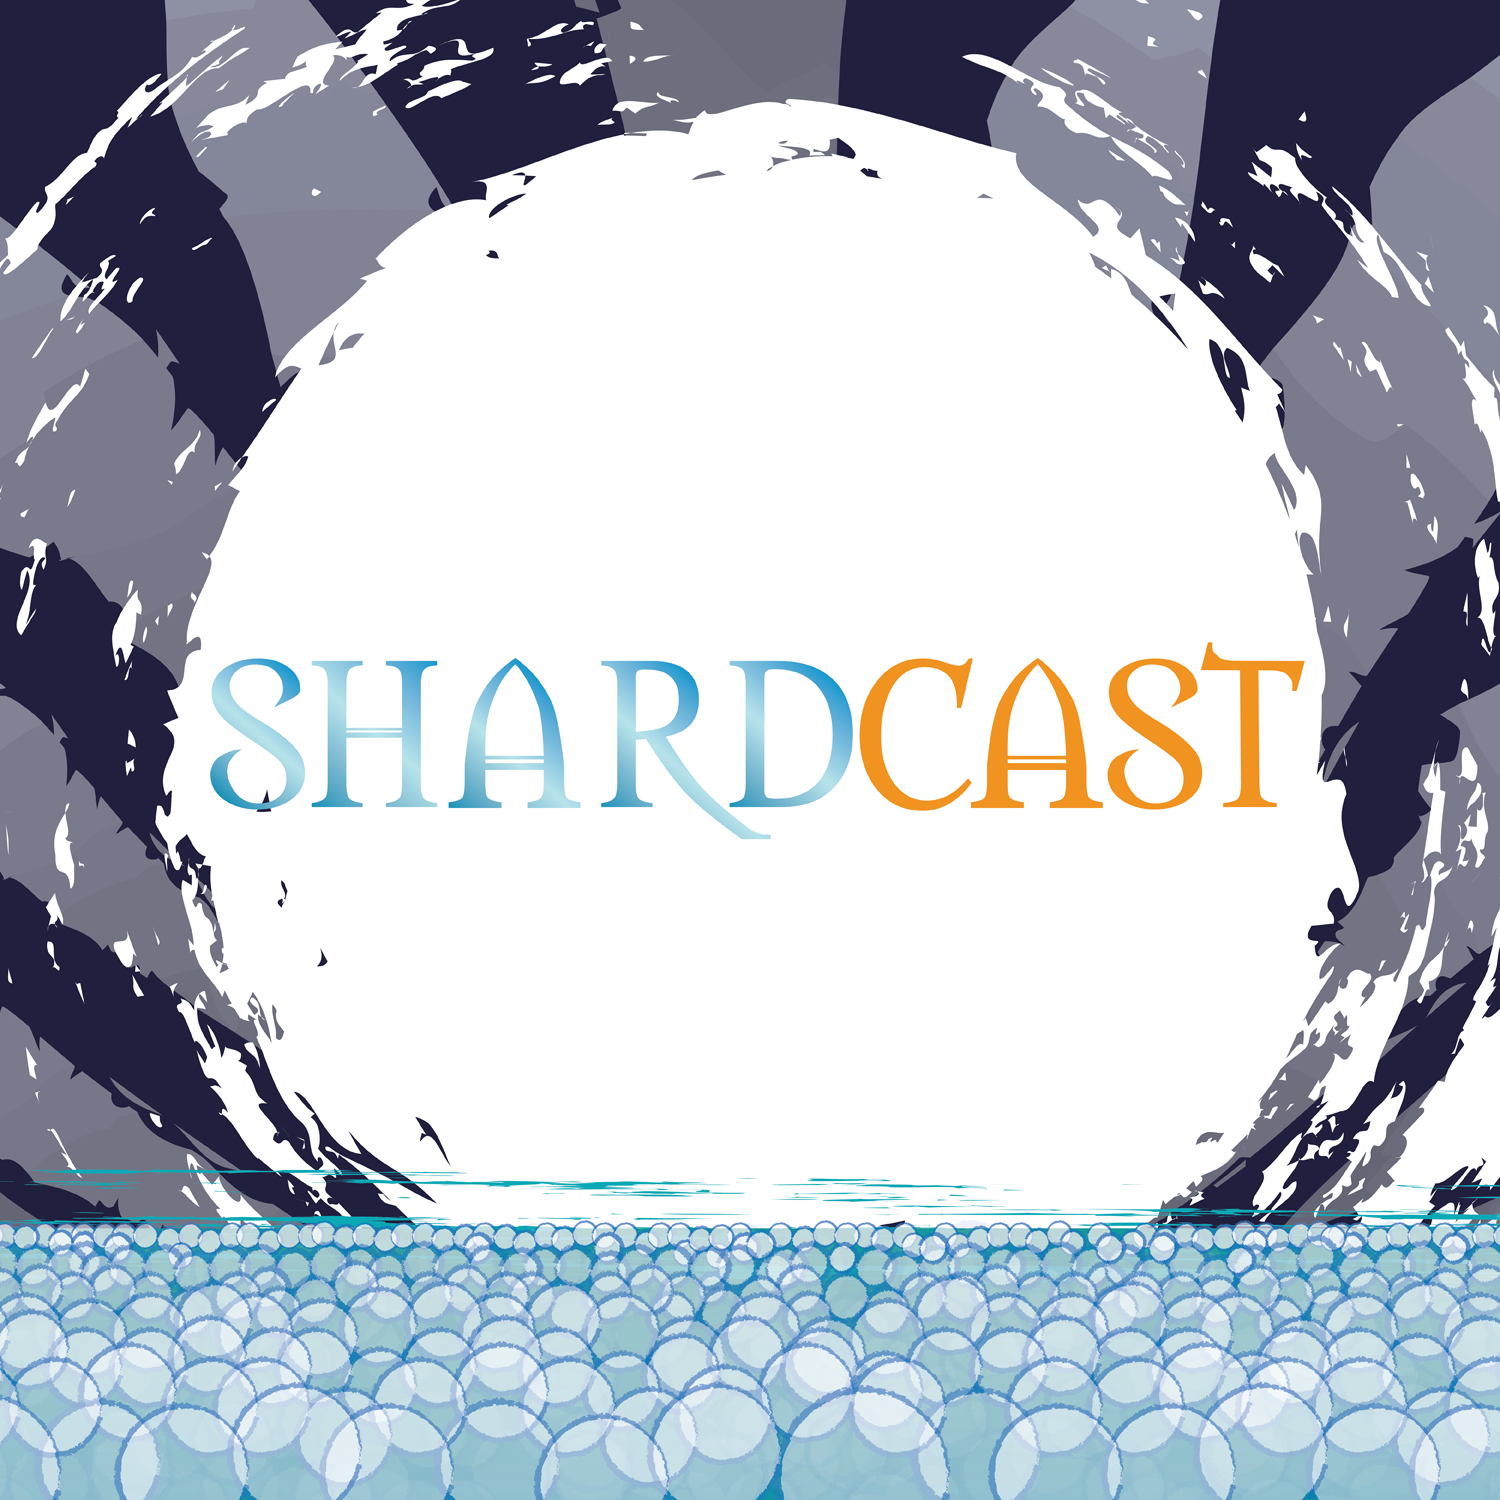 More information about "Shardcast: Queerness in the Cosmere"